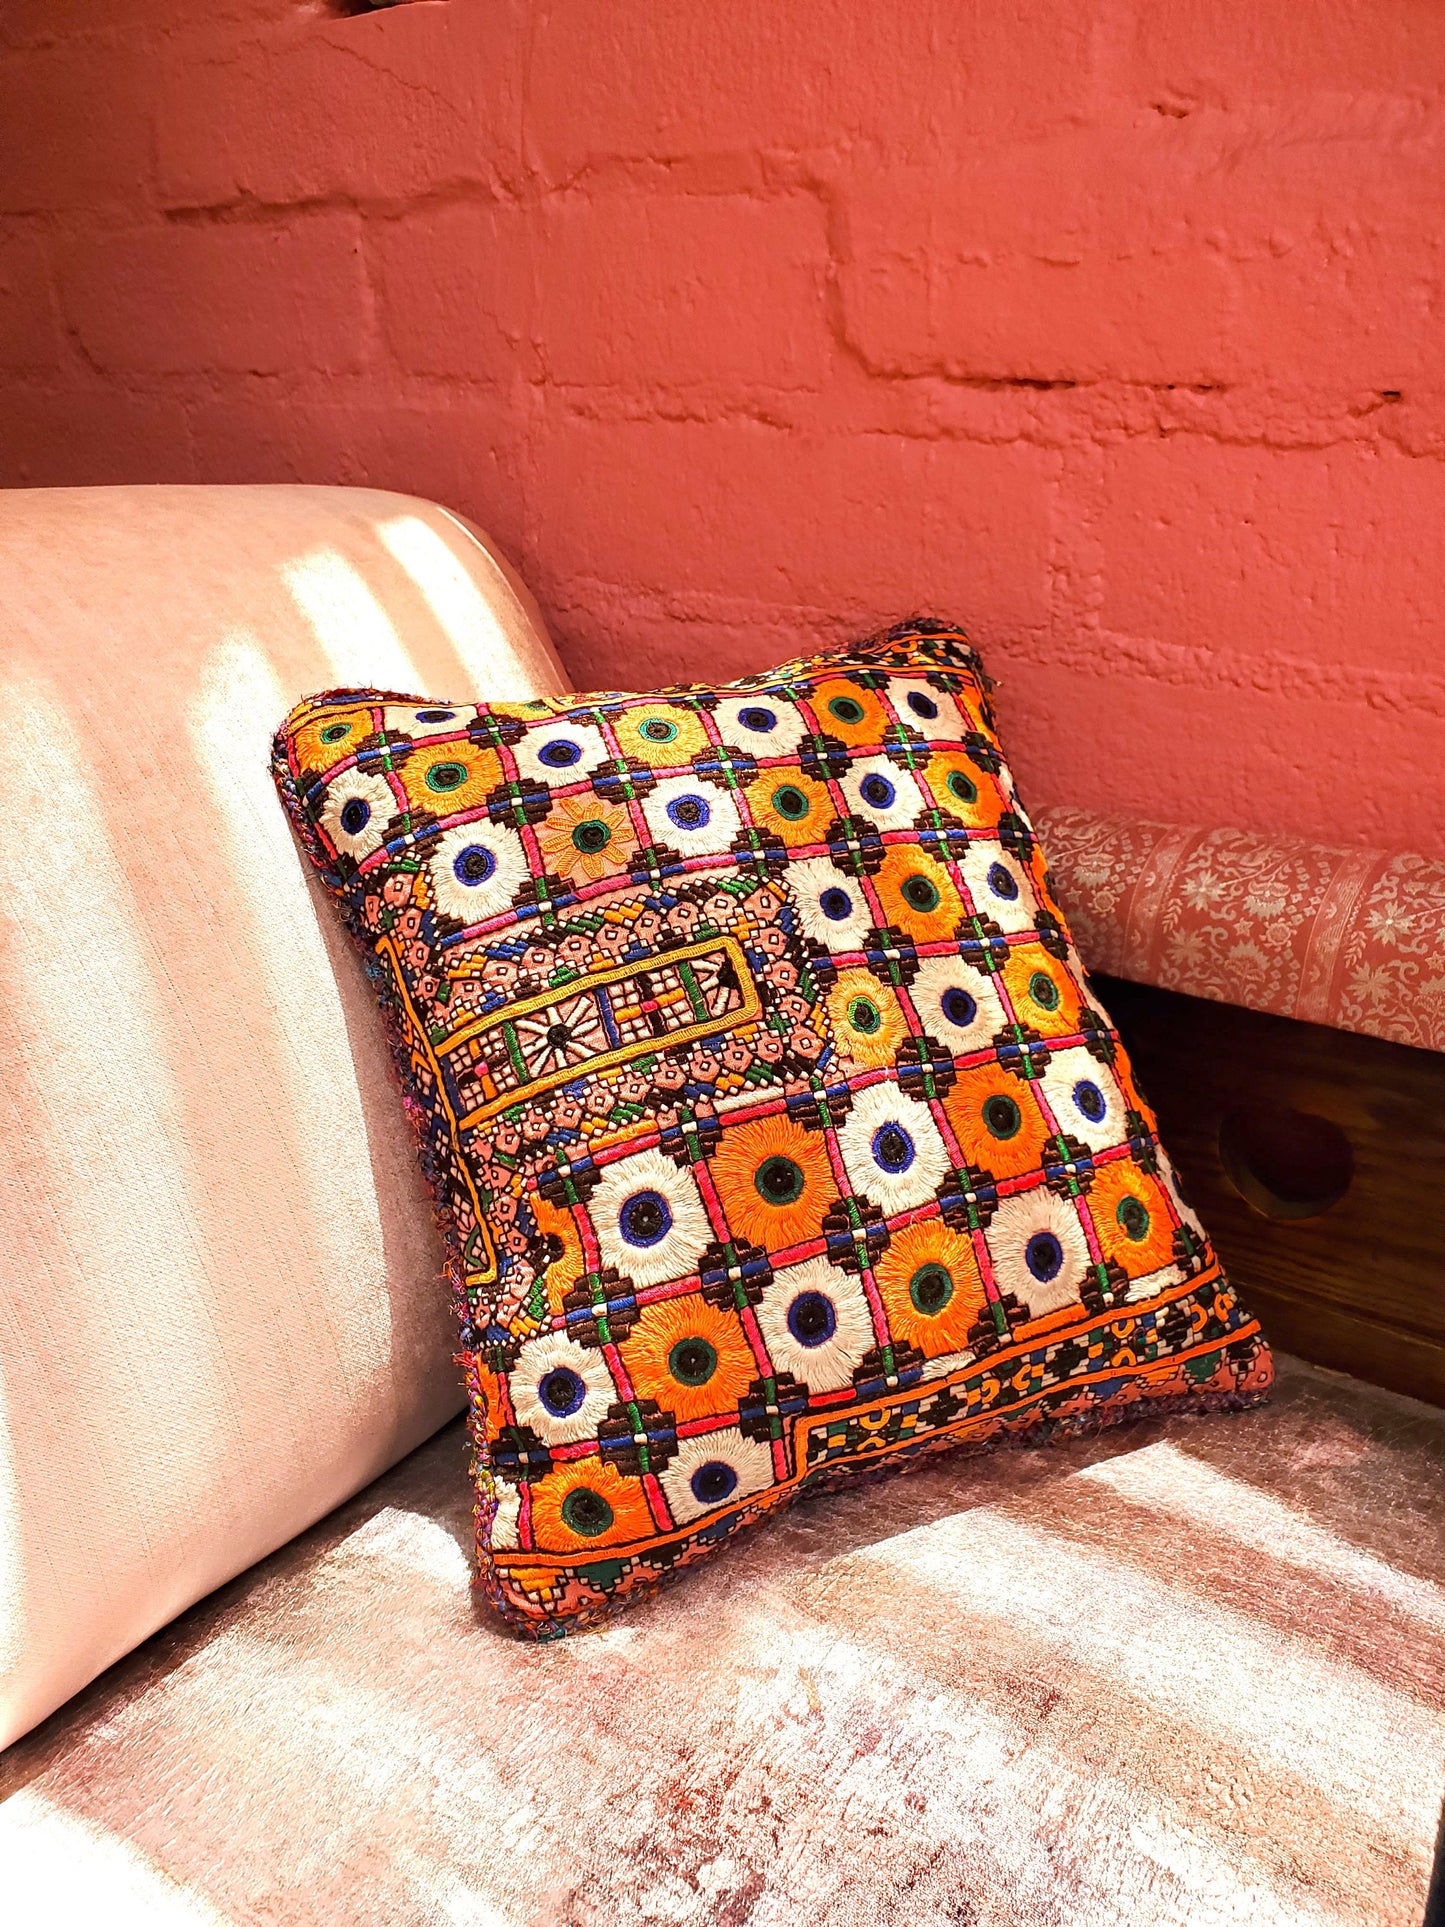 Multicolored Luxe Textiles Indian Bohemian Vintage Embroidered Cotton Decorative Luxe Throw Pillow